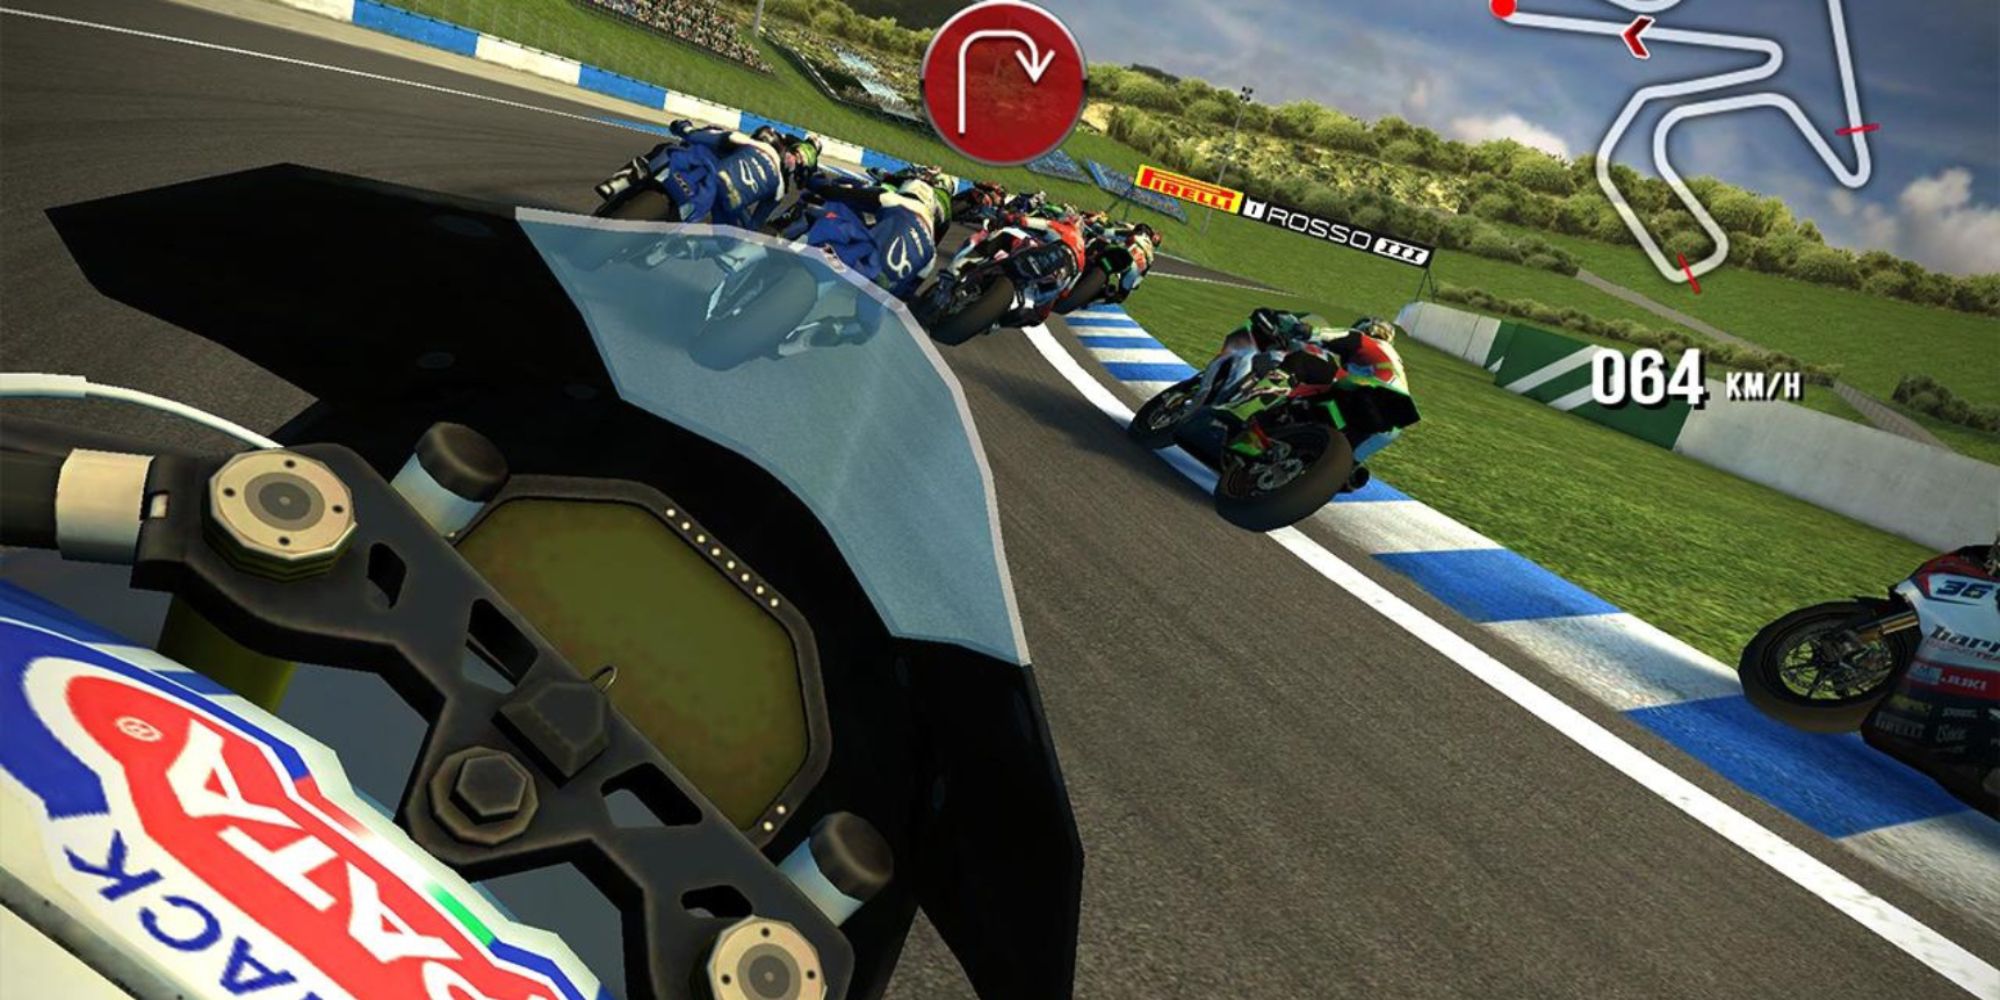 Best Racing Games on Mobile - SBK16 - Racer competes against tough opponents